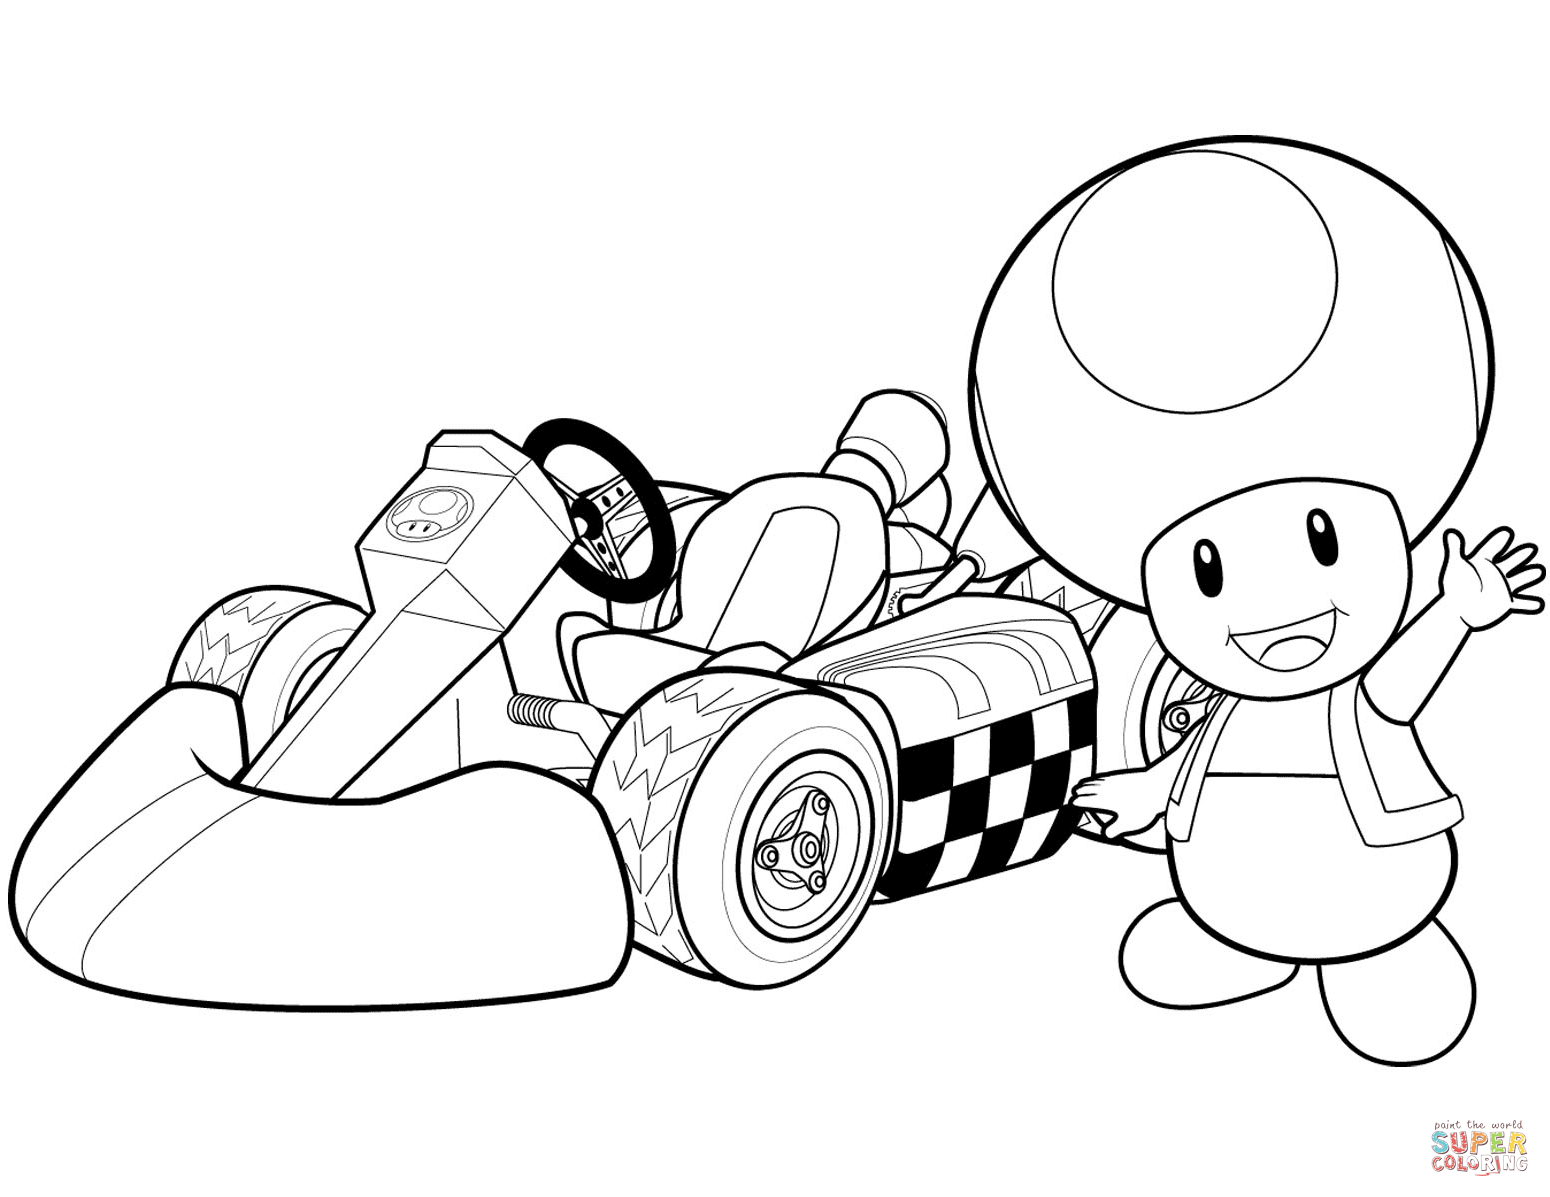 Toad coloring #7, Download drawings